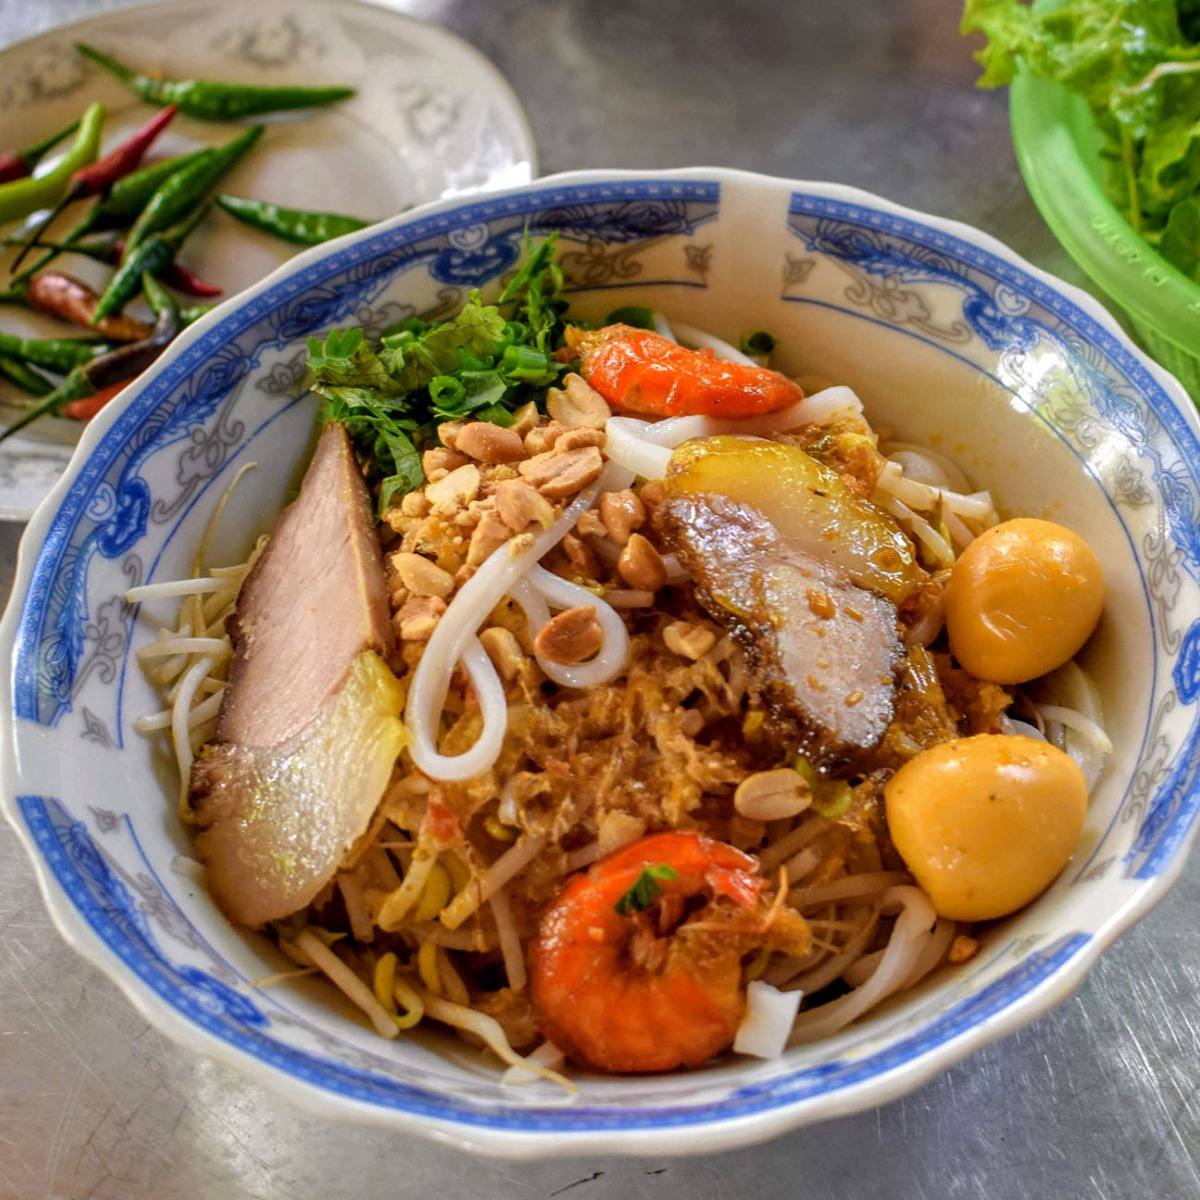 mi quang delicious noodle dish from southeast asia found in Vietnam